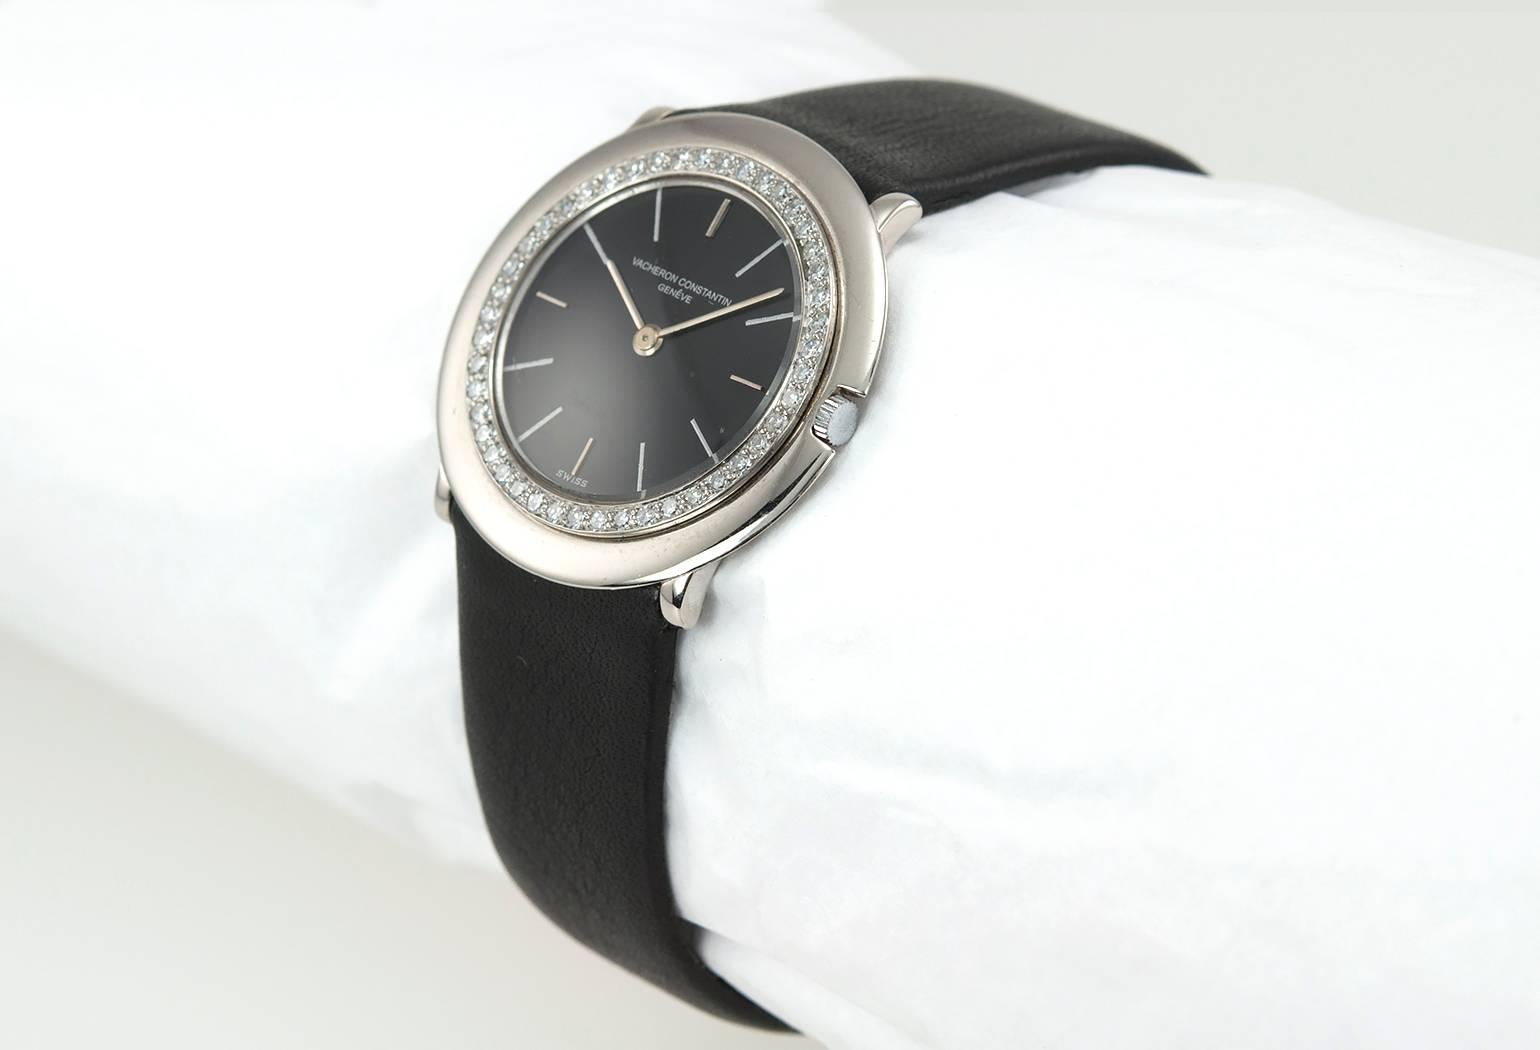 Vacheron & Constantin 18 karat white gold wristwatch, reference 6418. This great watch features a 18k white gold bezel with 46 round brilliant diamonds, a manual wind 17 jewel movement, a black refinished dial with a new black leather strap. Case